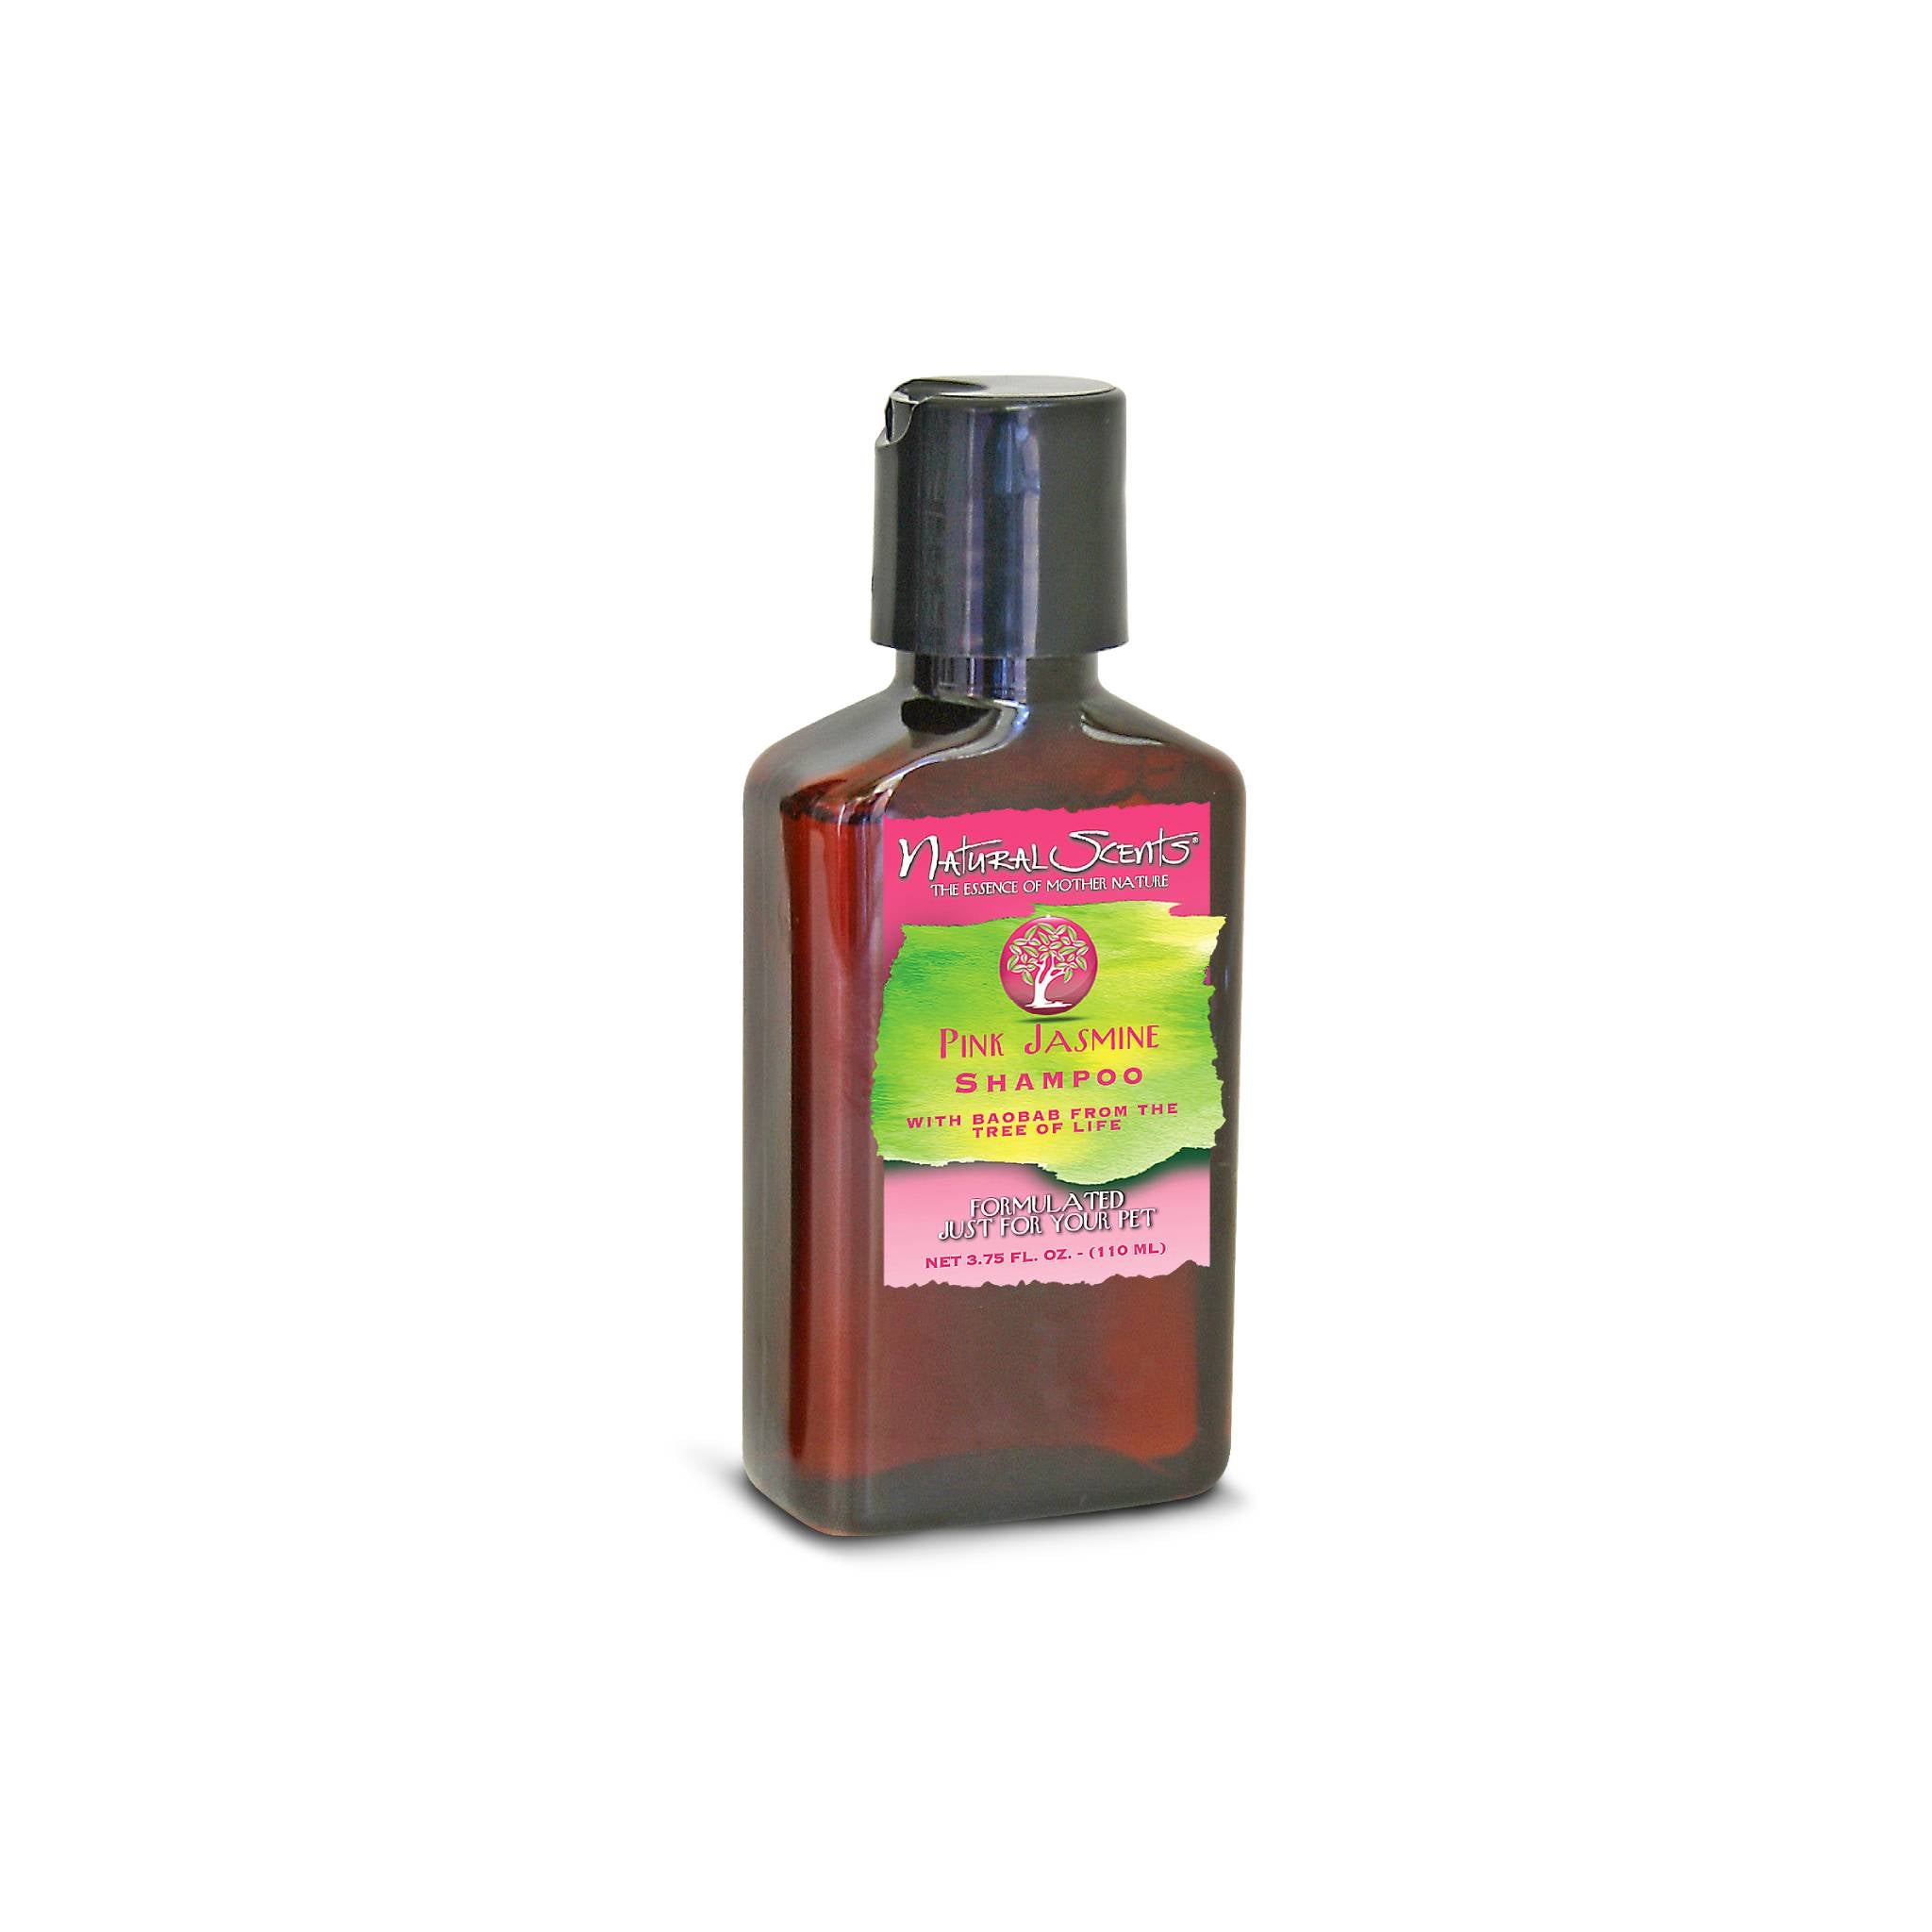 Biogroom Natural Scents Pink Jasmine Pet Shampoo for Cats and Dogs